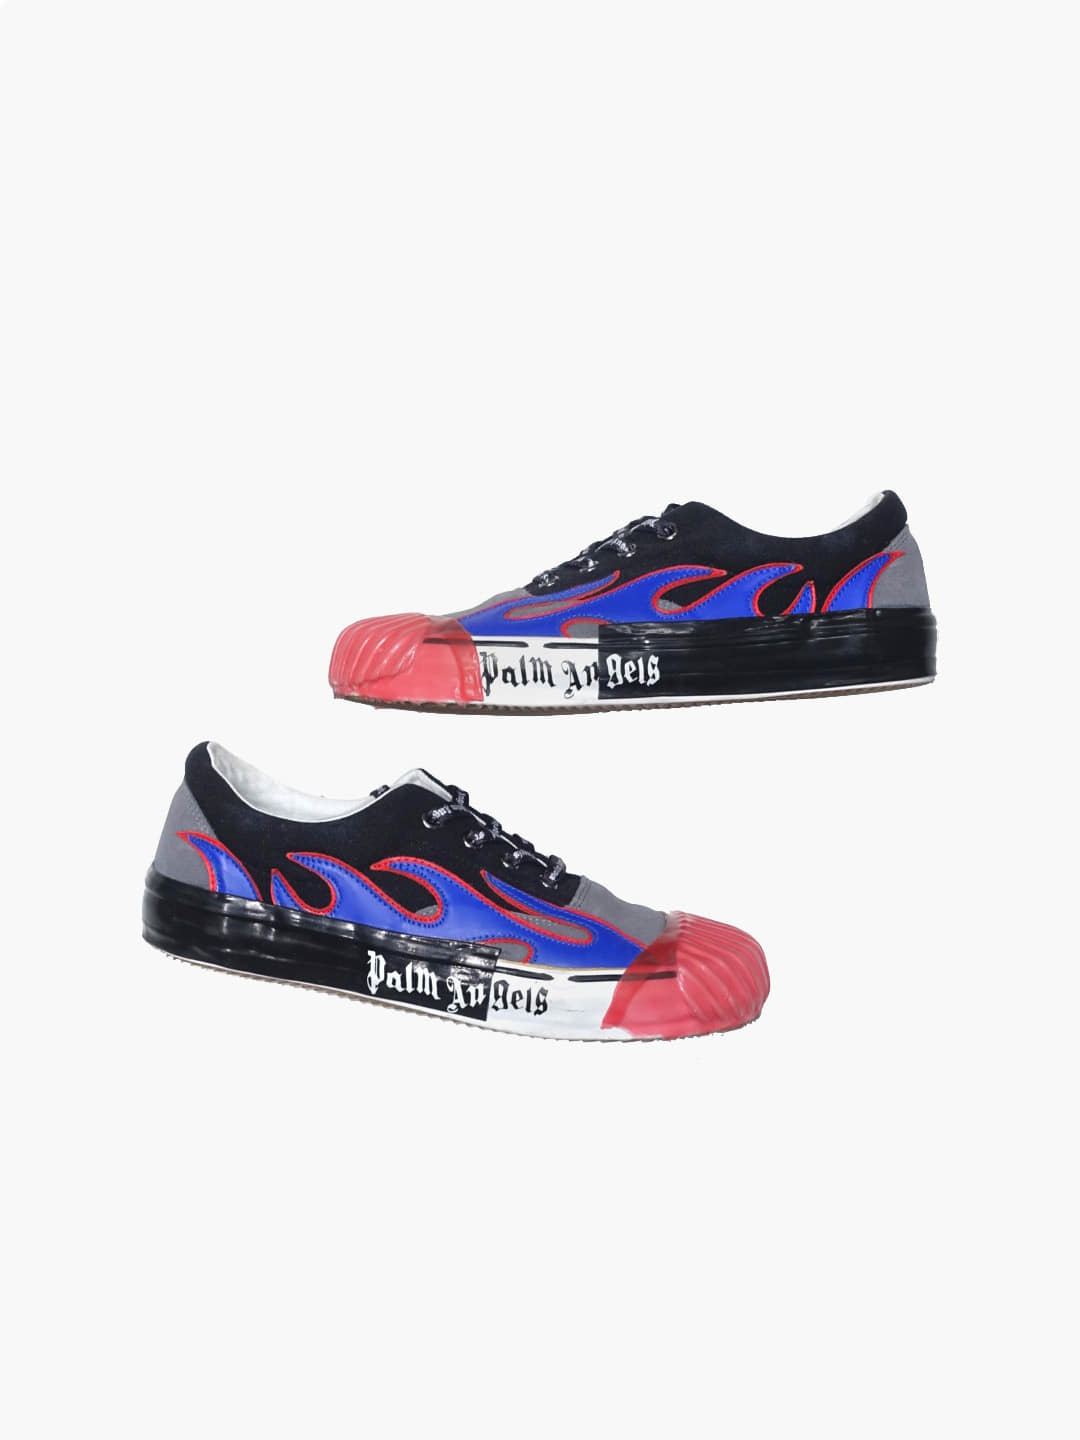 PALM ANGELSFlame multicolor sneakers